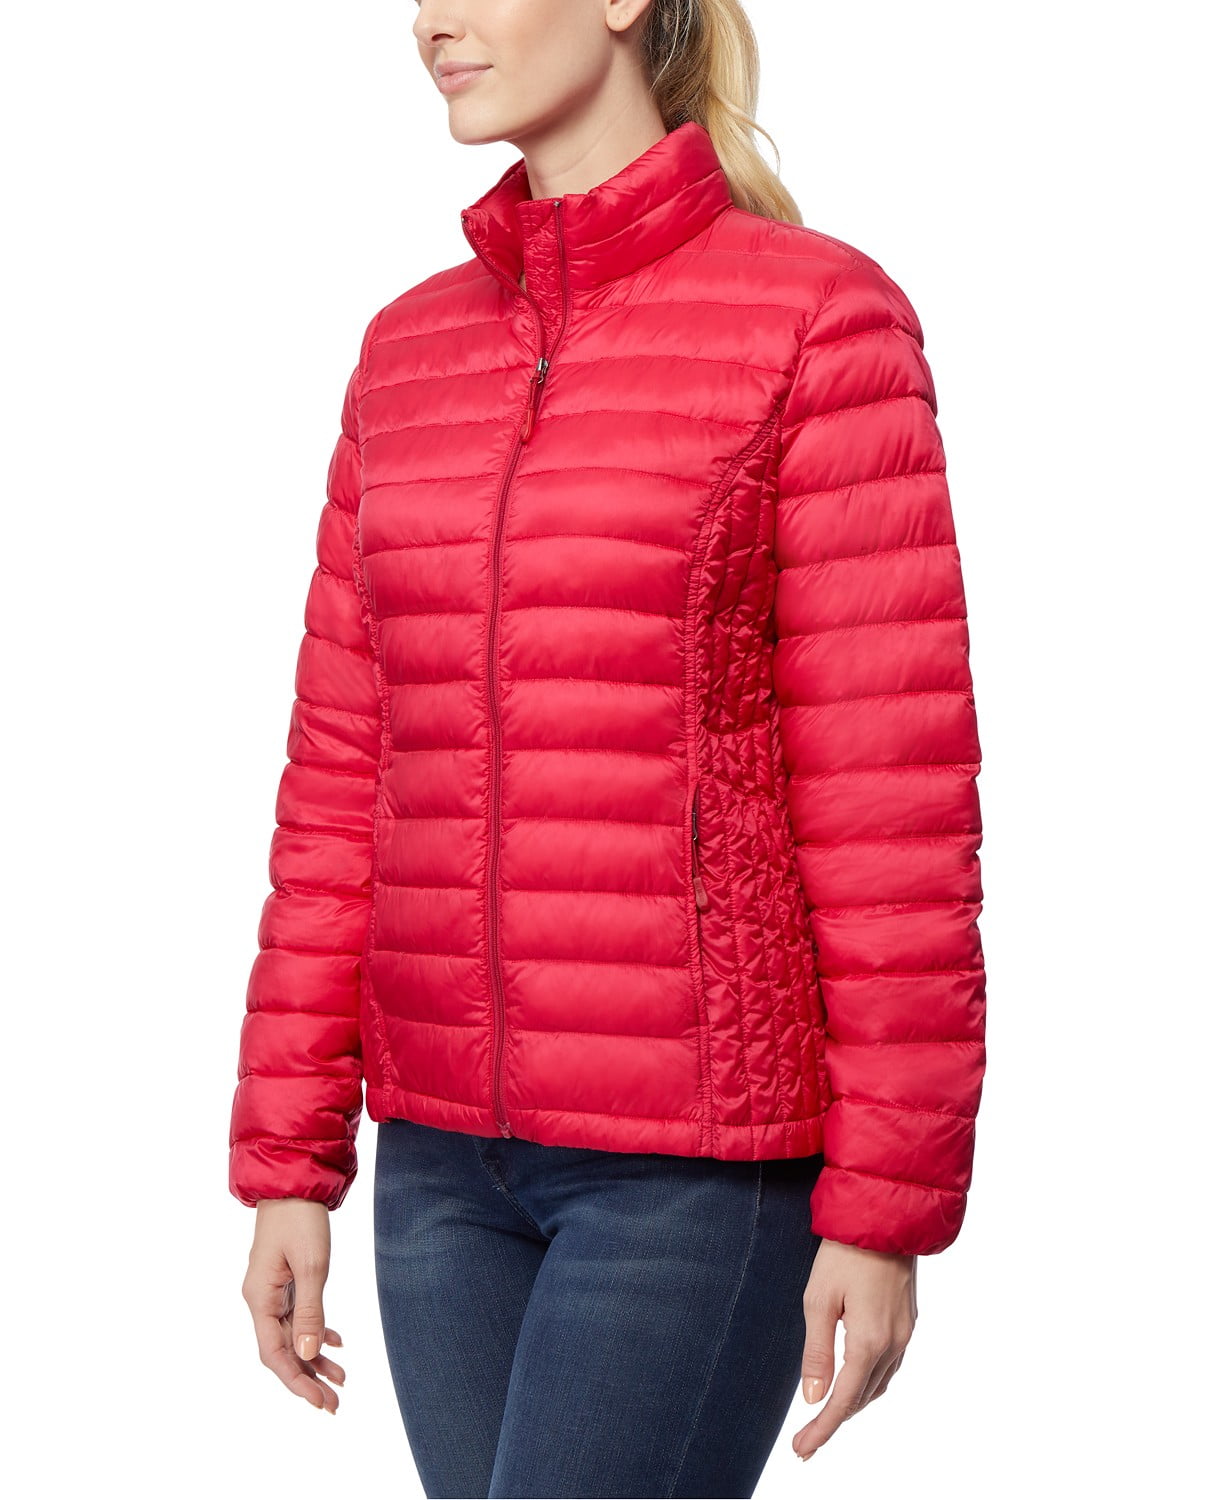 www.couturepoint.com-32-degrees-womens-pink-packable-down-puffer-coat-jacket